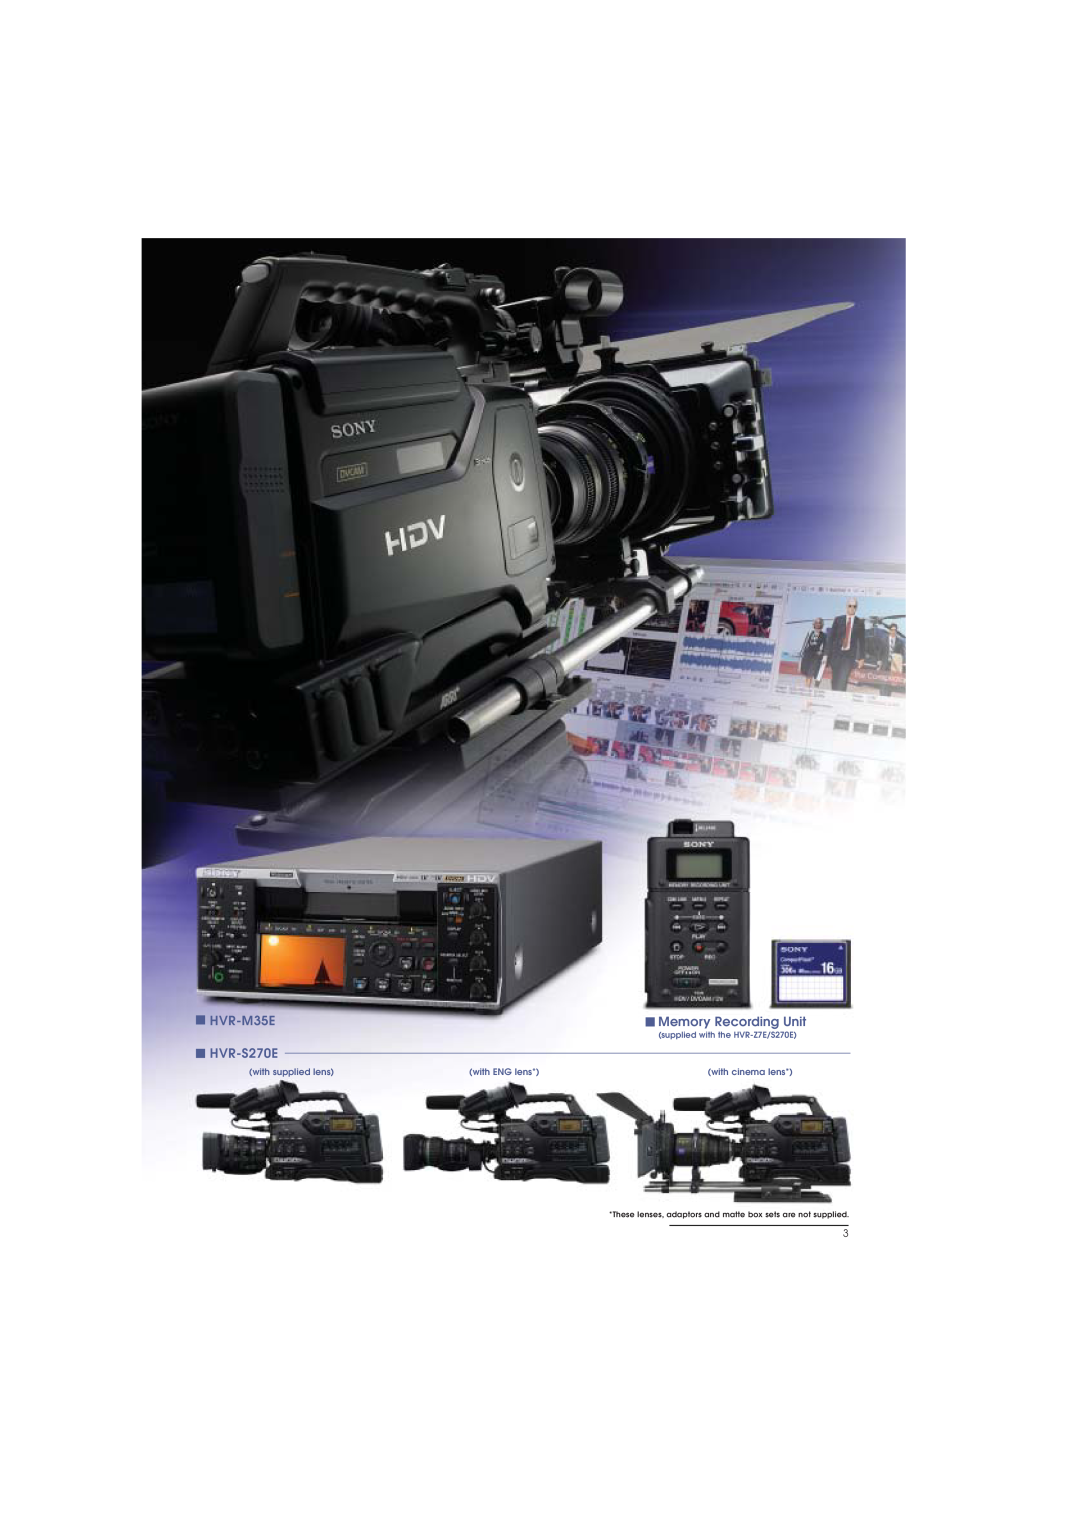 Sony HVR-Z7E manual HVR-M35E, Memory Recording Unit, HVR-S270E, These lenses, adaptors and matte box sets are not supplied 